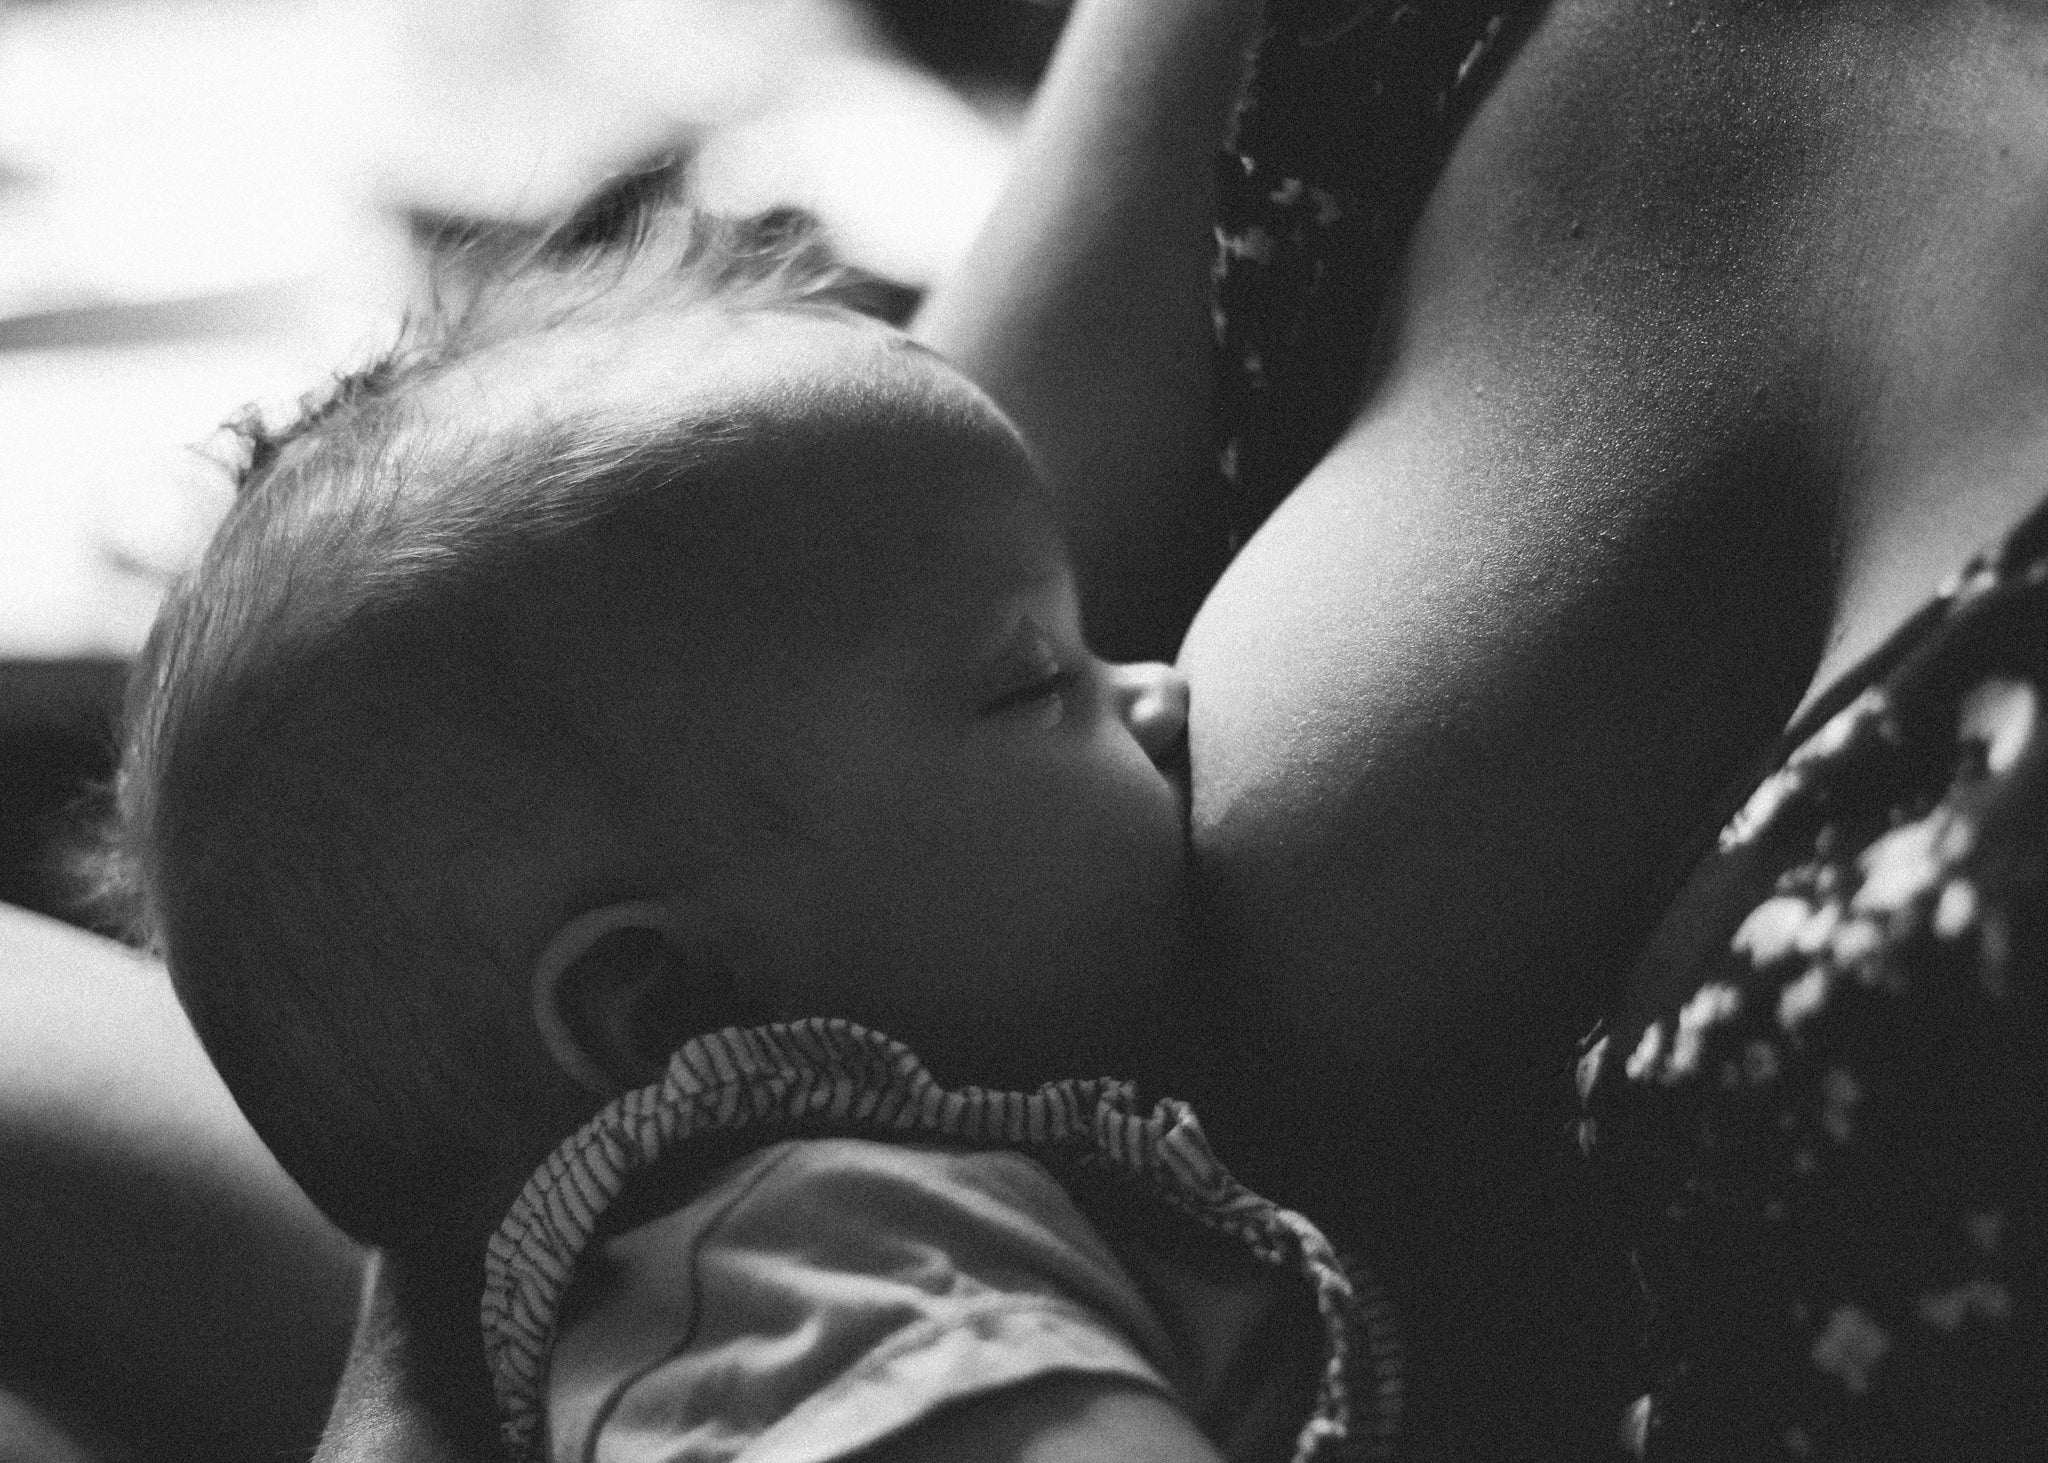 Foods for Breastfeeding: What Do Mama and Baby Need?